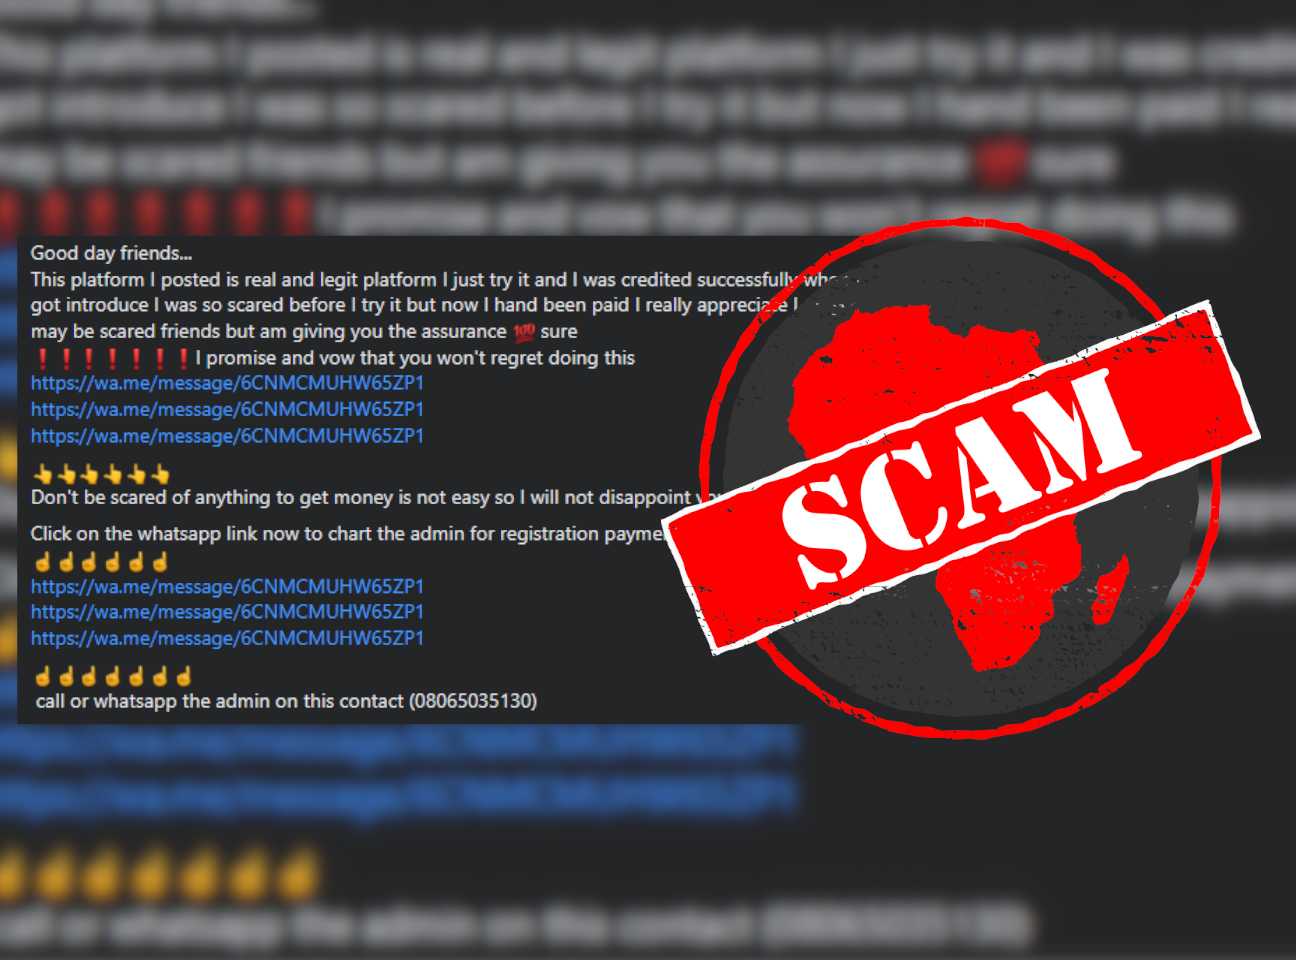 HelpingHand_Scam